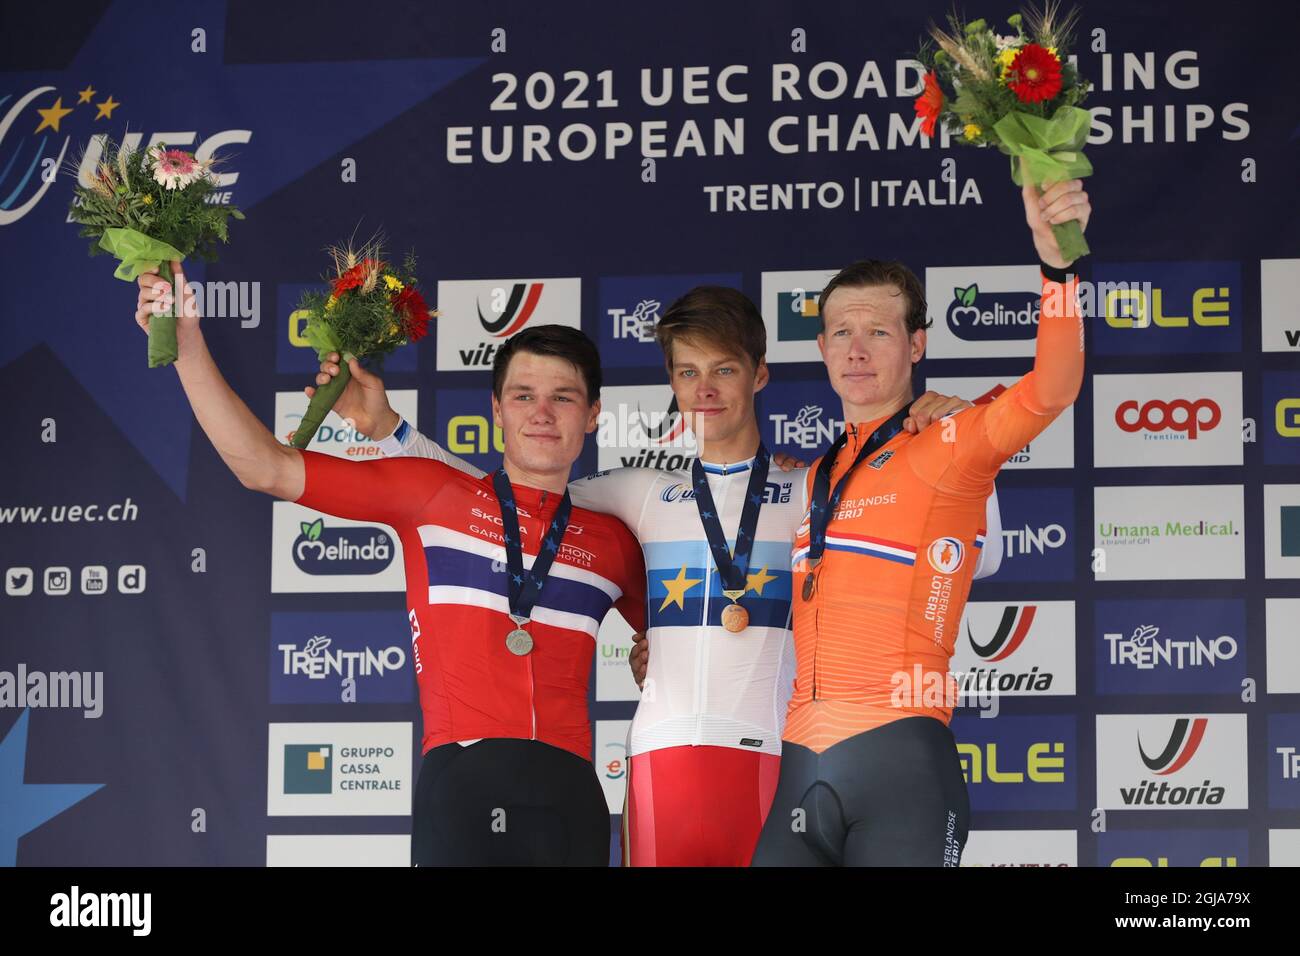 Trento, Trento, Italy, September 09, 2021, Johan PRICE PEJTERSEN (DEN), S..ren W..RENSKJOLD (NOR) and Dan HOOLE (NED)  during  UEC Road European Championships - Under 23 Men Individual Time Trial - Street Cycling Stock Photo